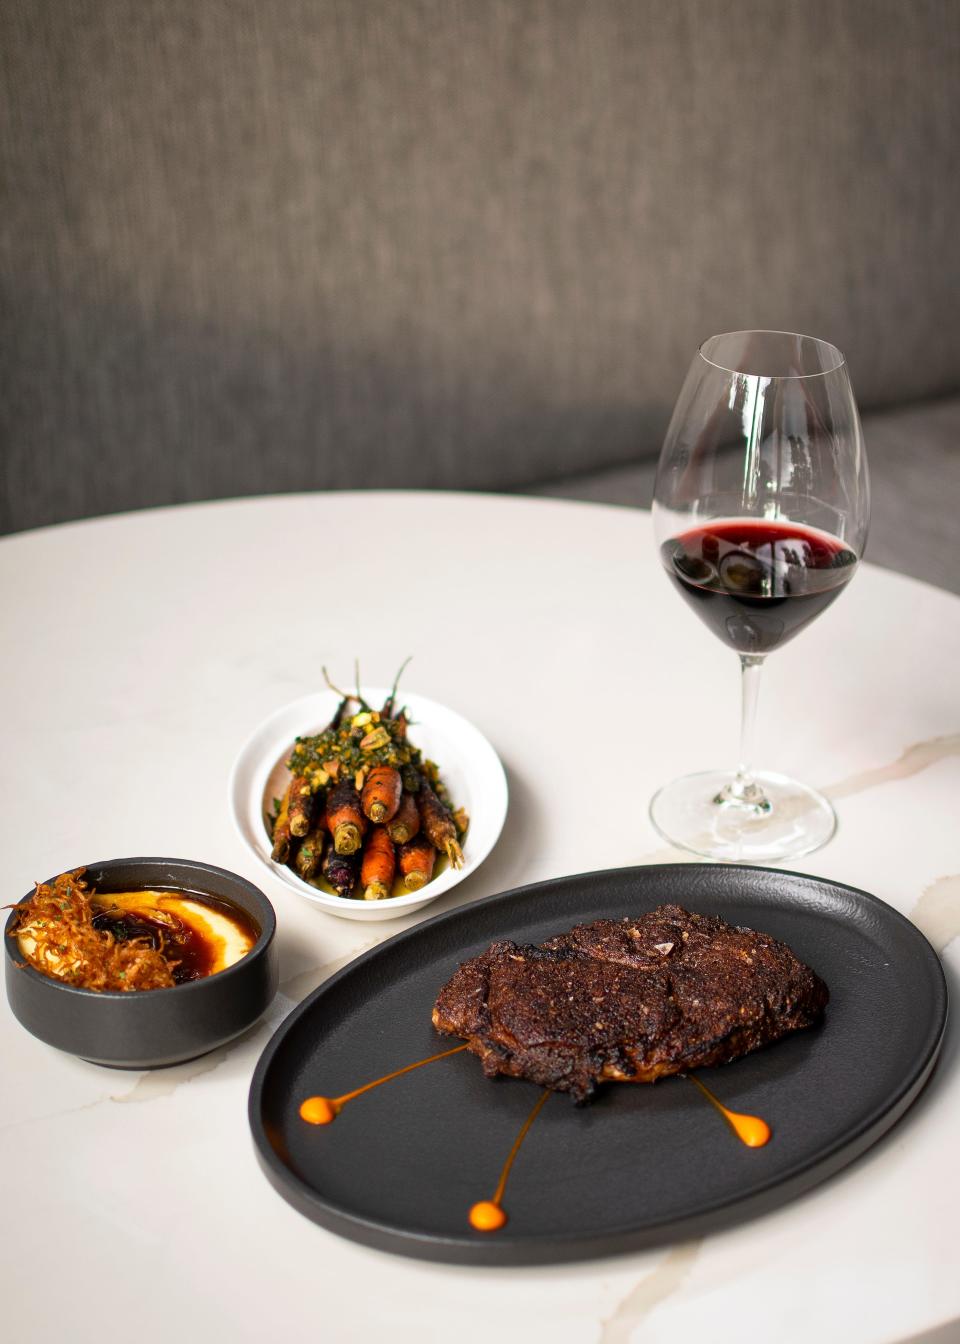 The ribeye steak, served with sides of heirloom carrots topped with a pistachio pesto and potato puree with chicken jus, at The Americano in Scottsdale on Dec. 9, 2021.